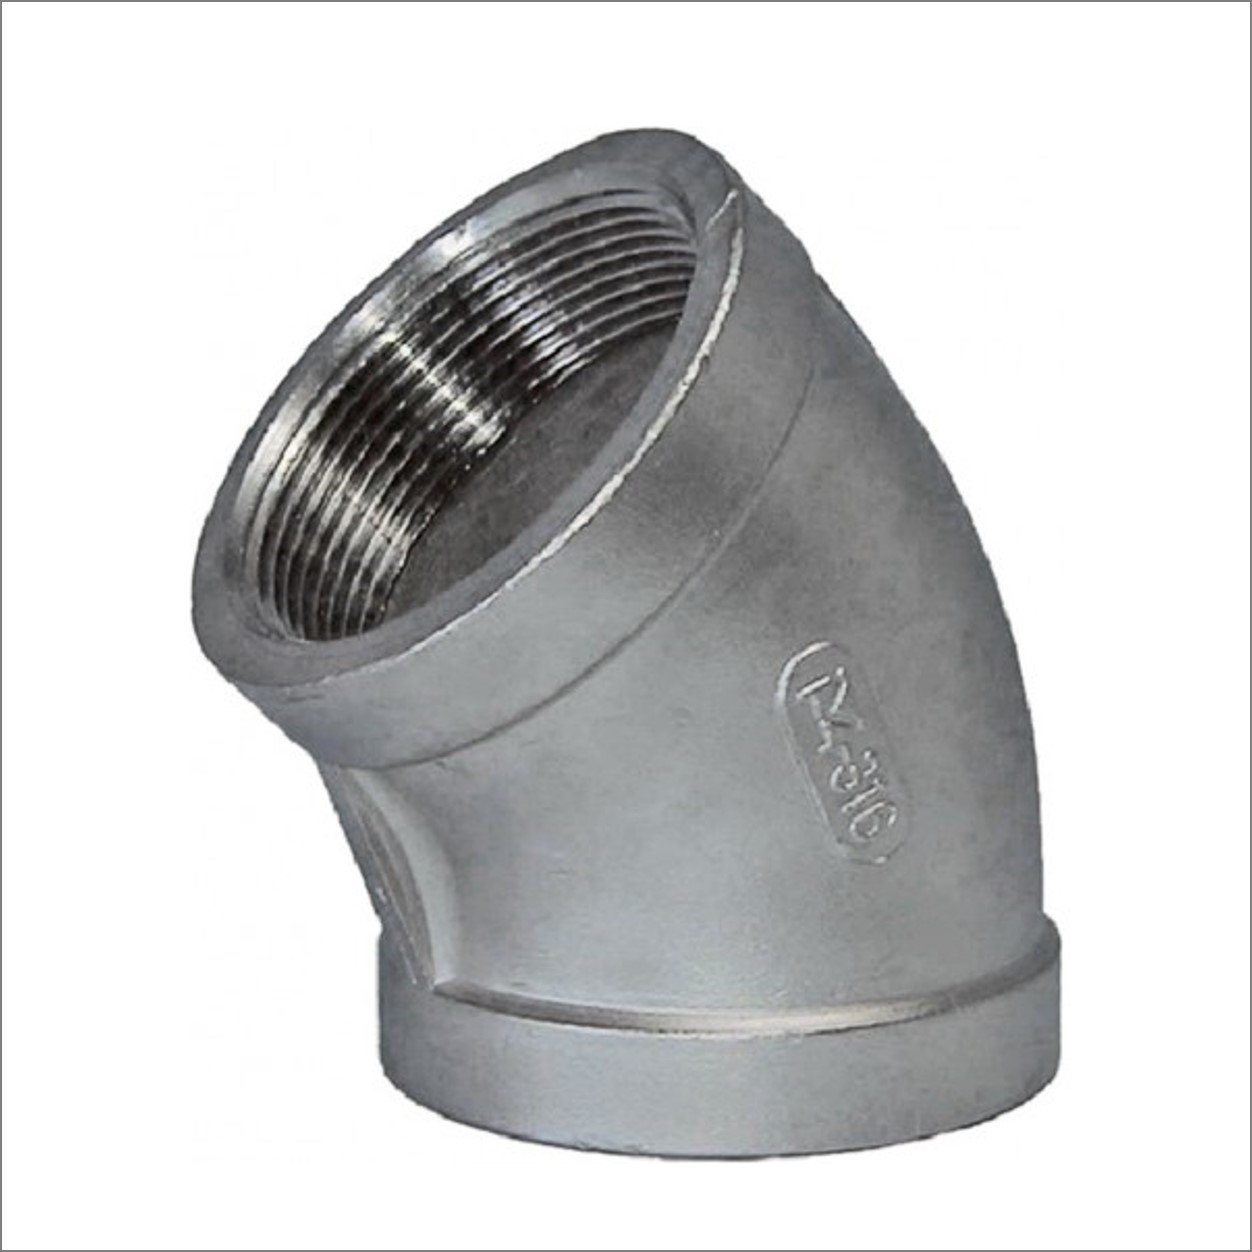 BSP Threaded Elbow Union Cone Seat 150LB 316 Stainless Steel